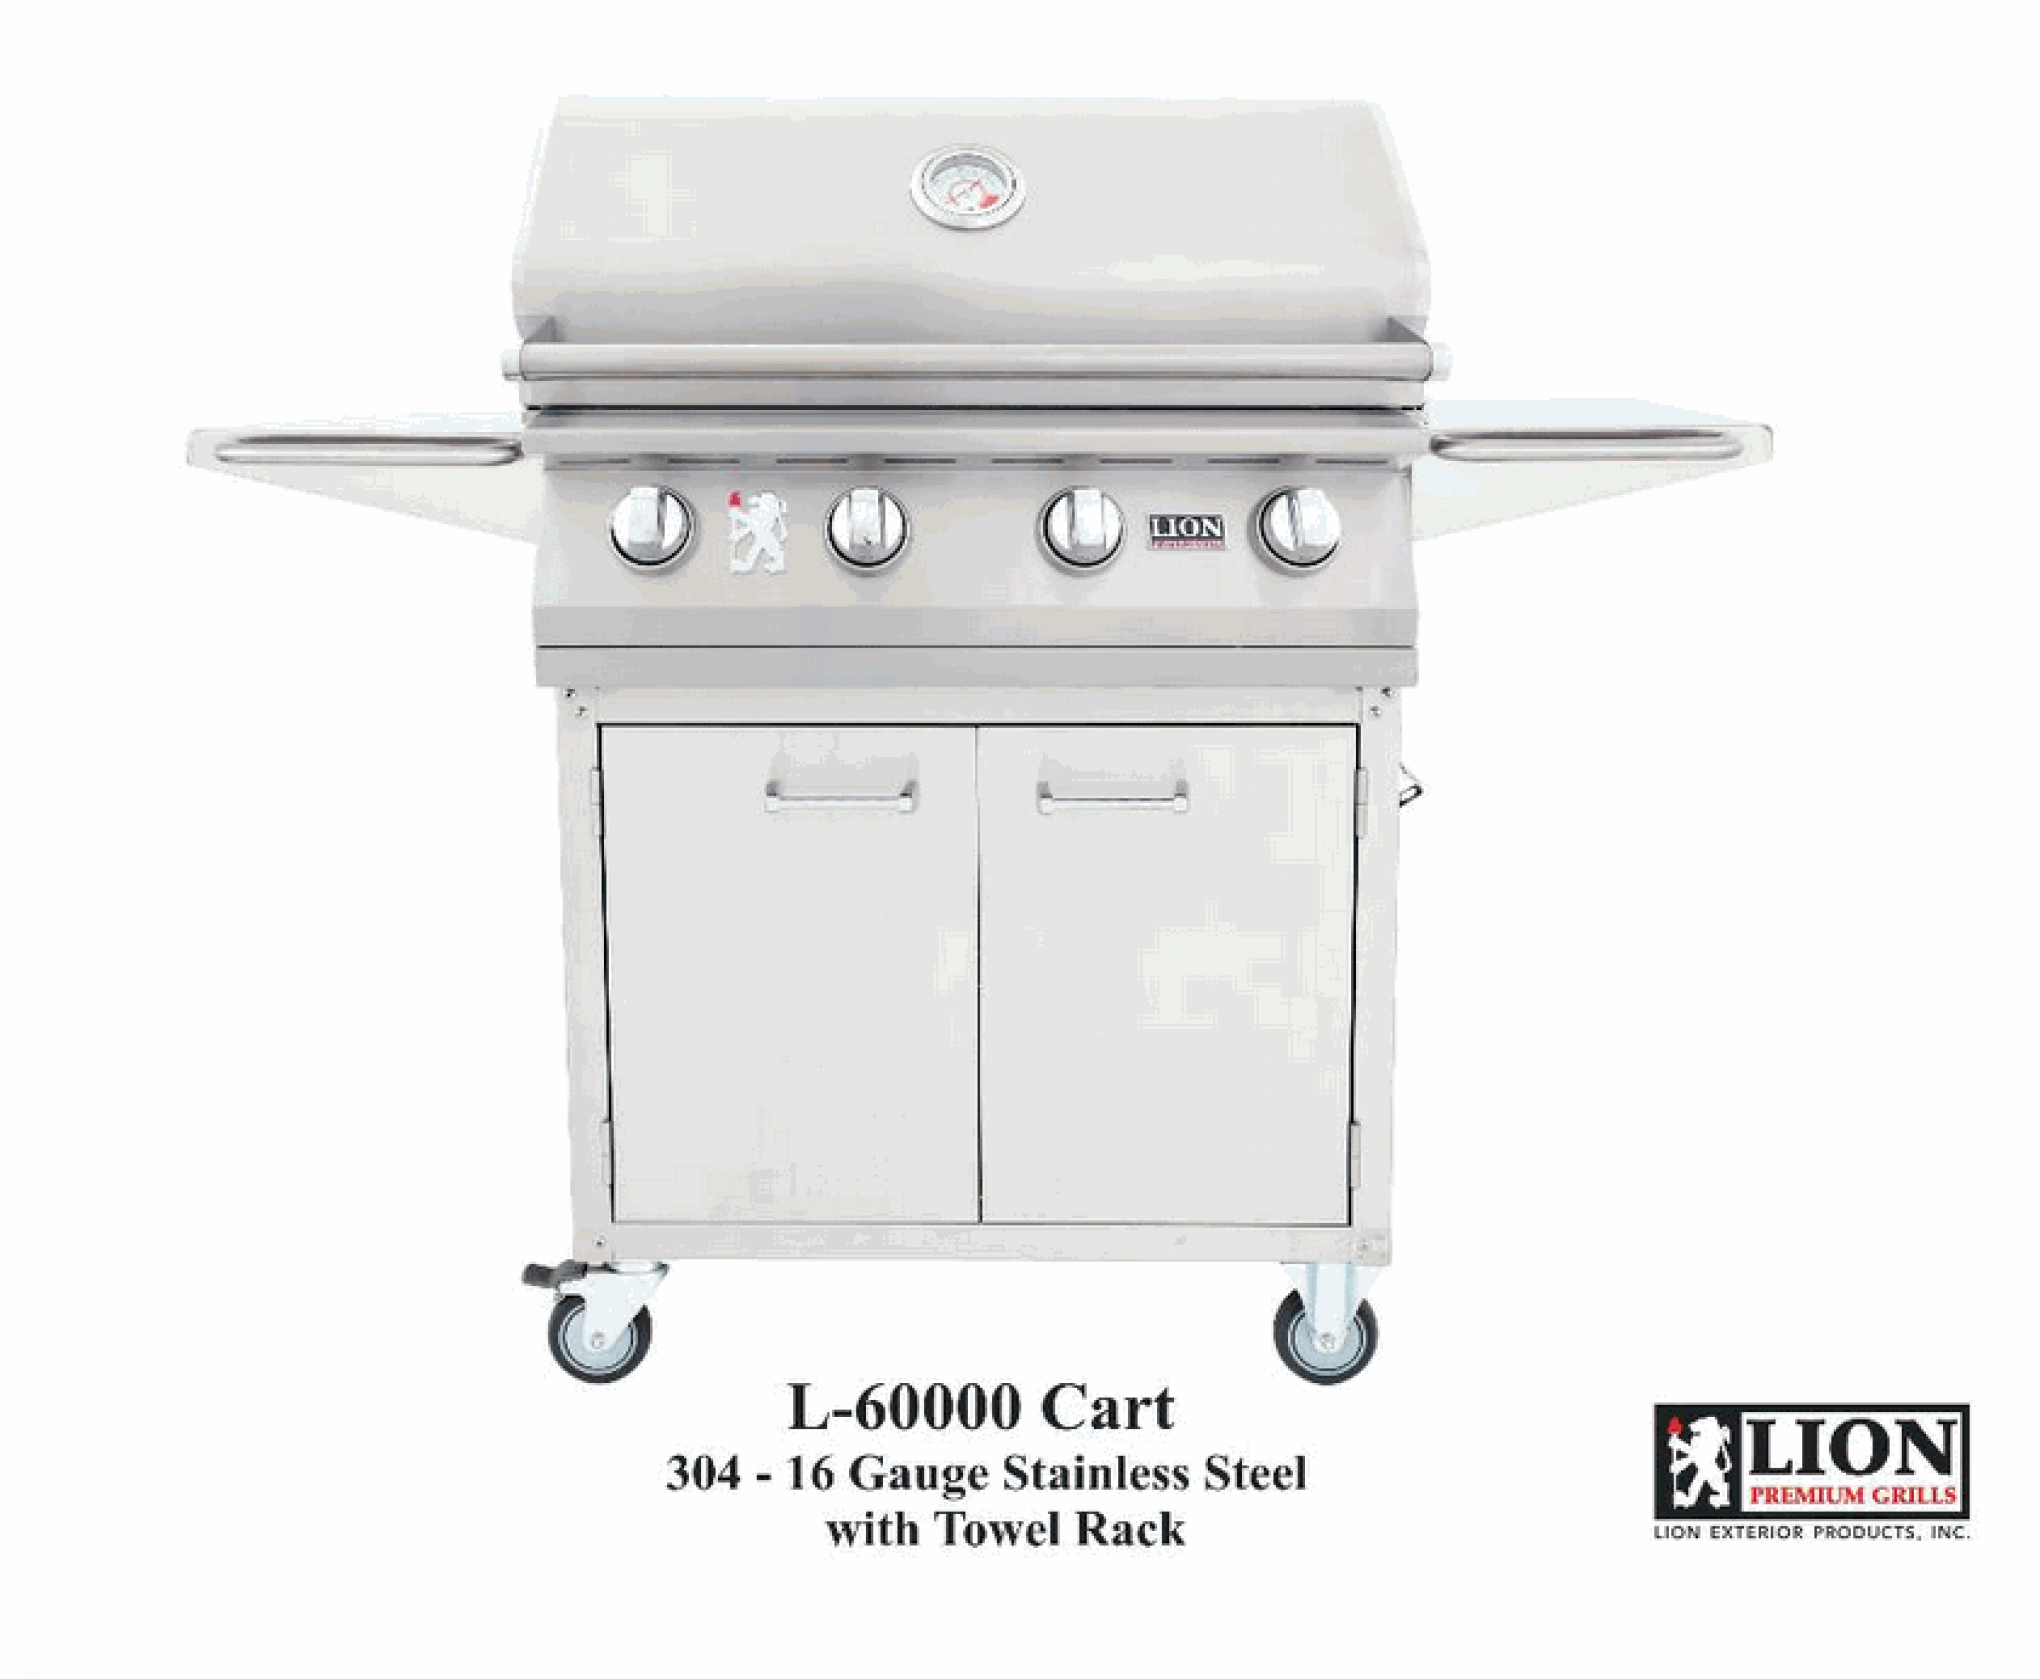 Lion 32" Propane Grill on a Cart with No Lights and No Rear Burner